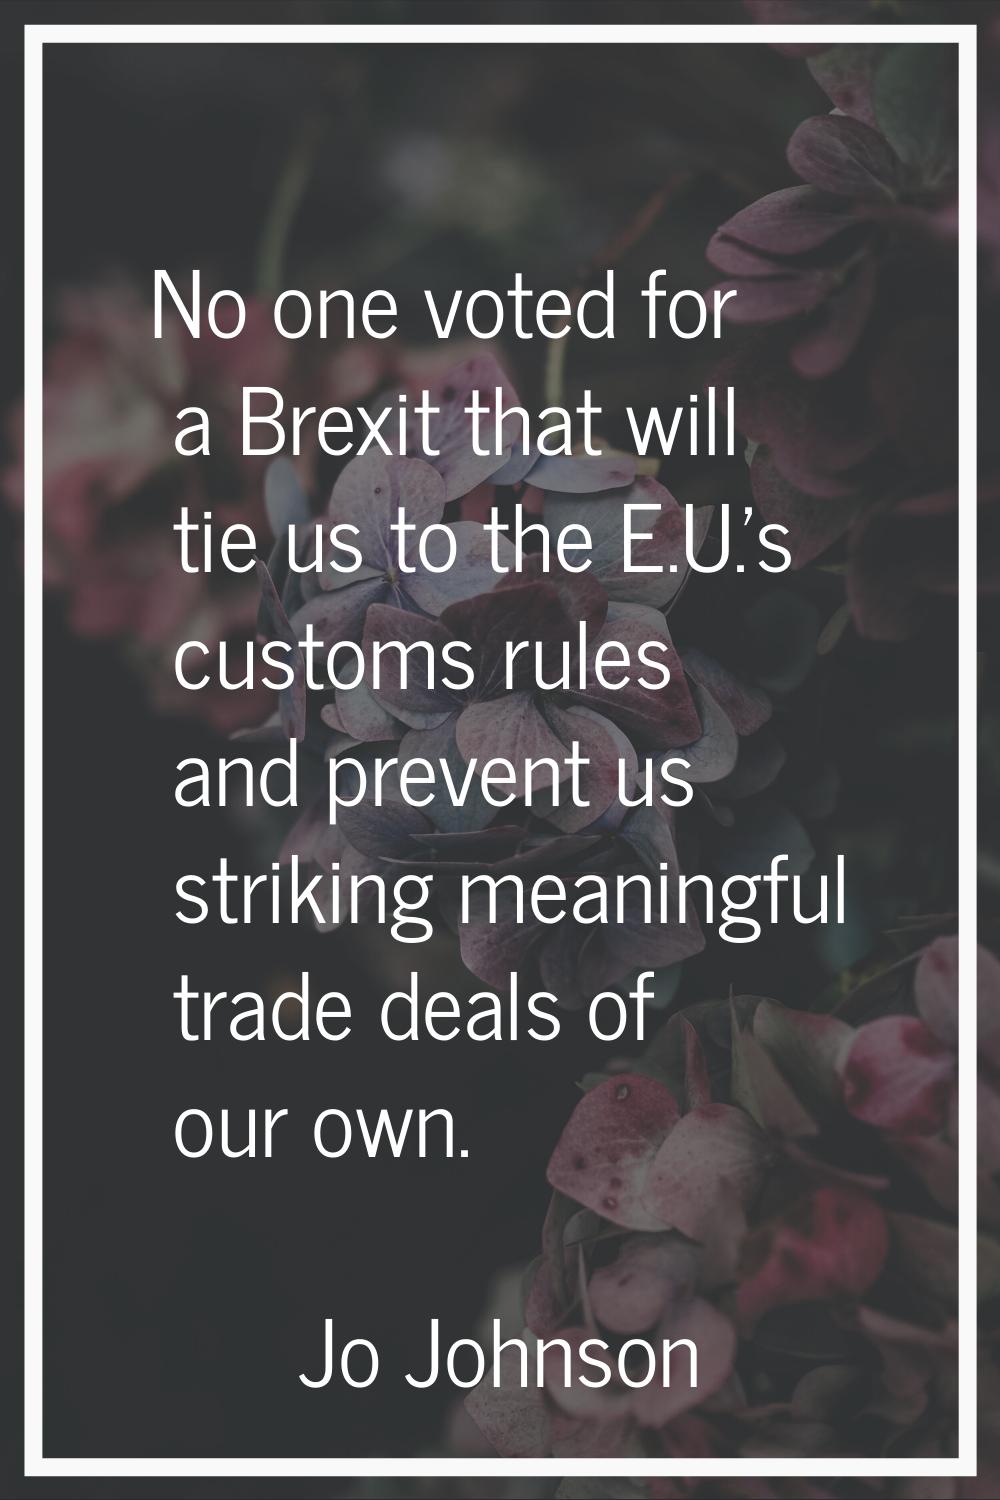 No one voted for a Brexit that will tie us to the E.U.'s customs rules and prevent us striking mean